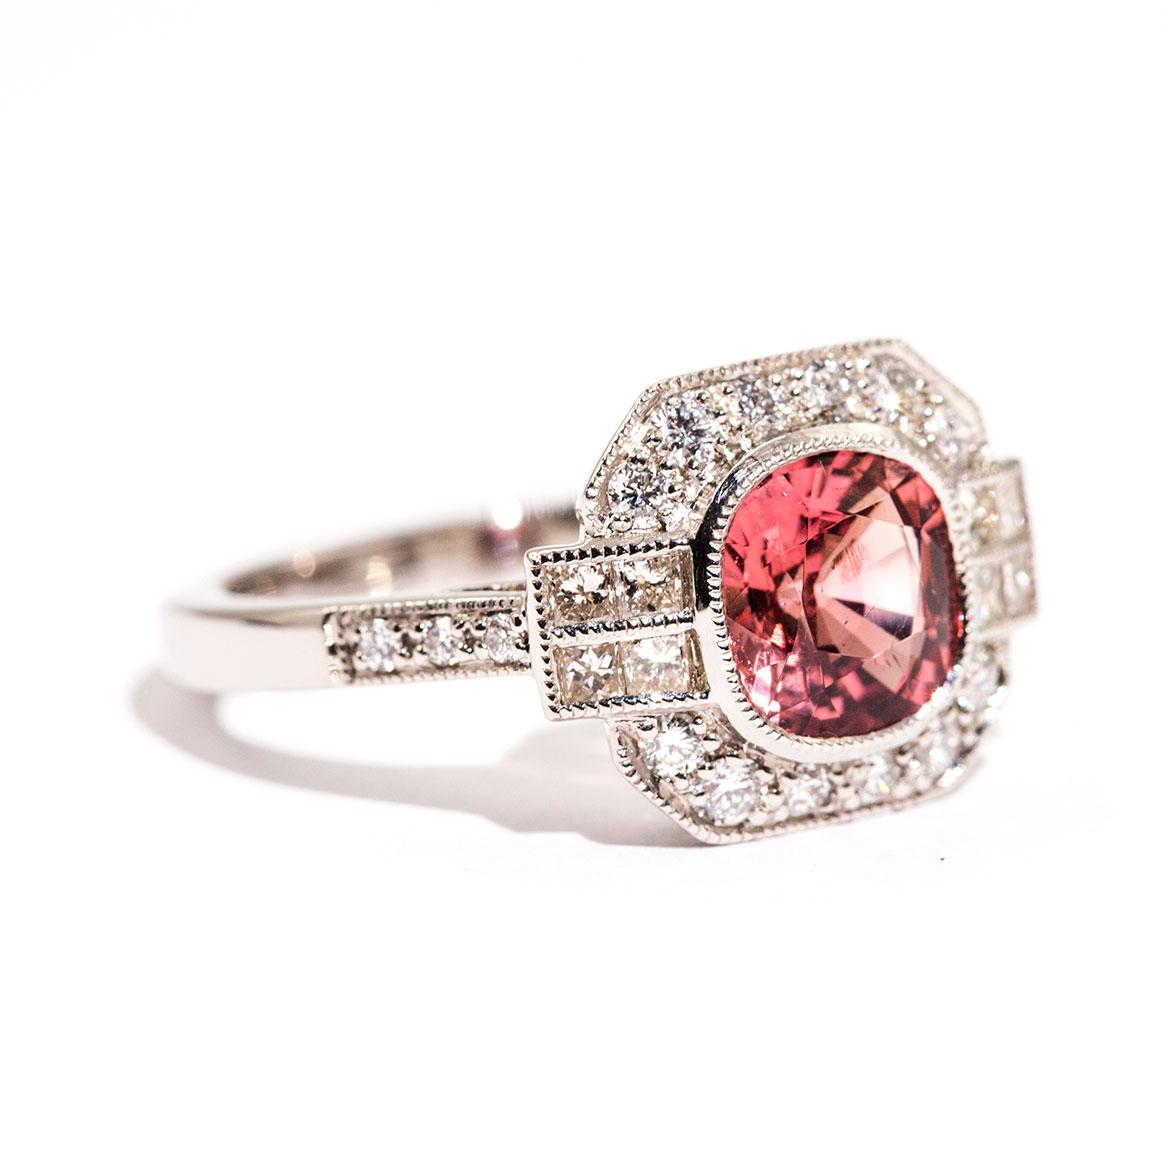 Forged in platinum is this alluring Art Deco inspired ring that features a captivating 1.47 carat bright reddish orange cushion cut spinel complimented by a total of 0.52 carats of sparkling round brilliant cut diamonds. We have named this stunning